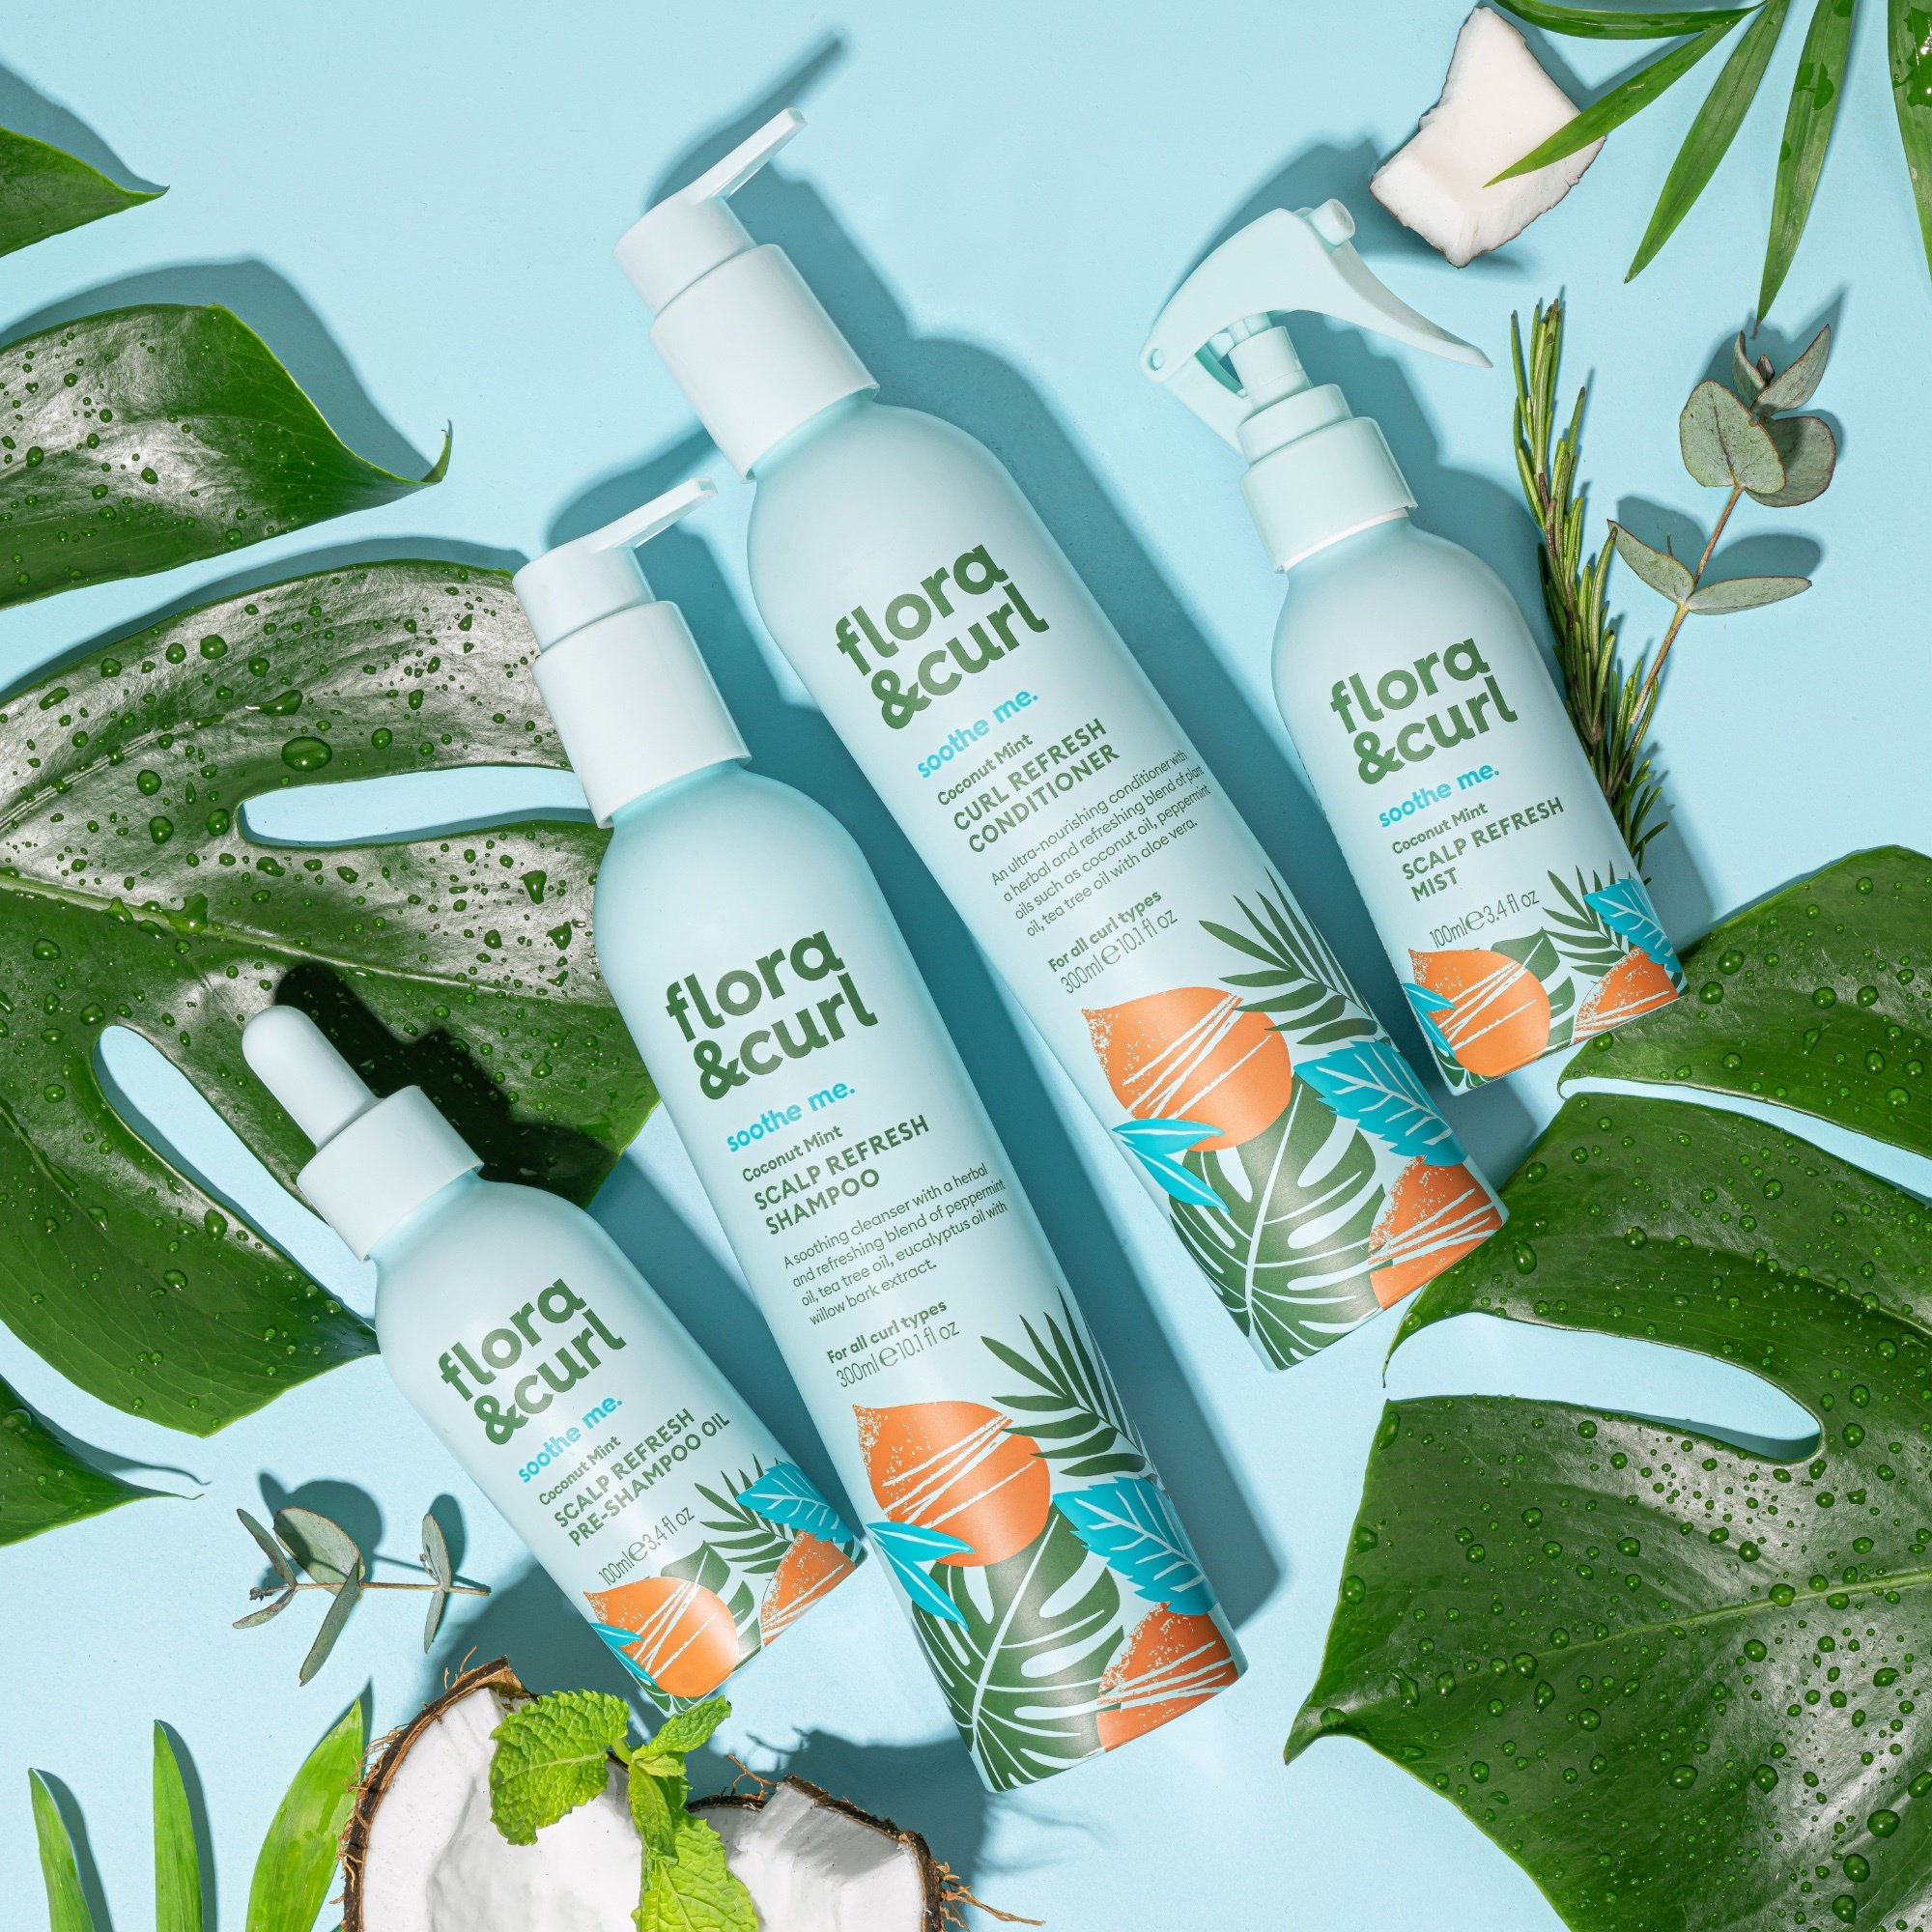 Soothing Refresh Pre-Shampoo Oil, Coconut Mint